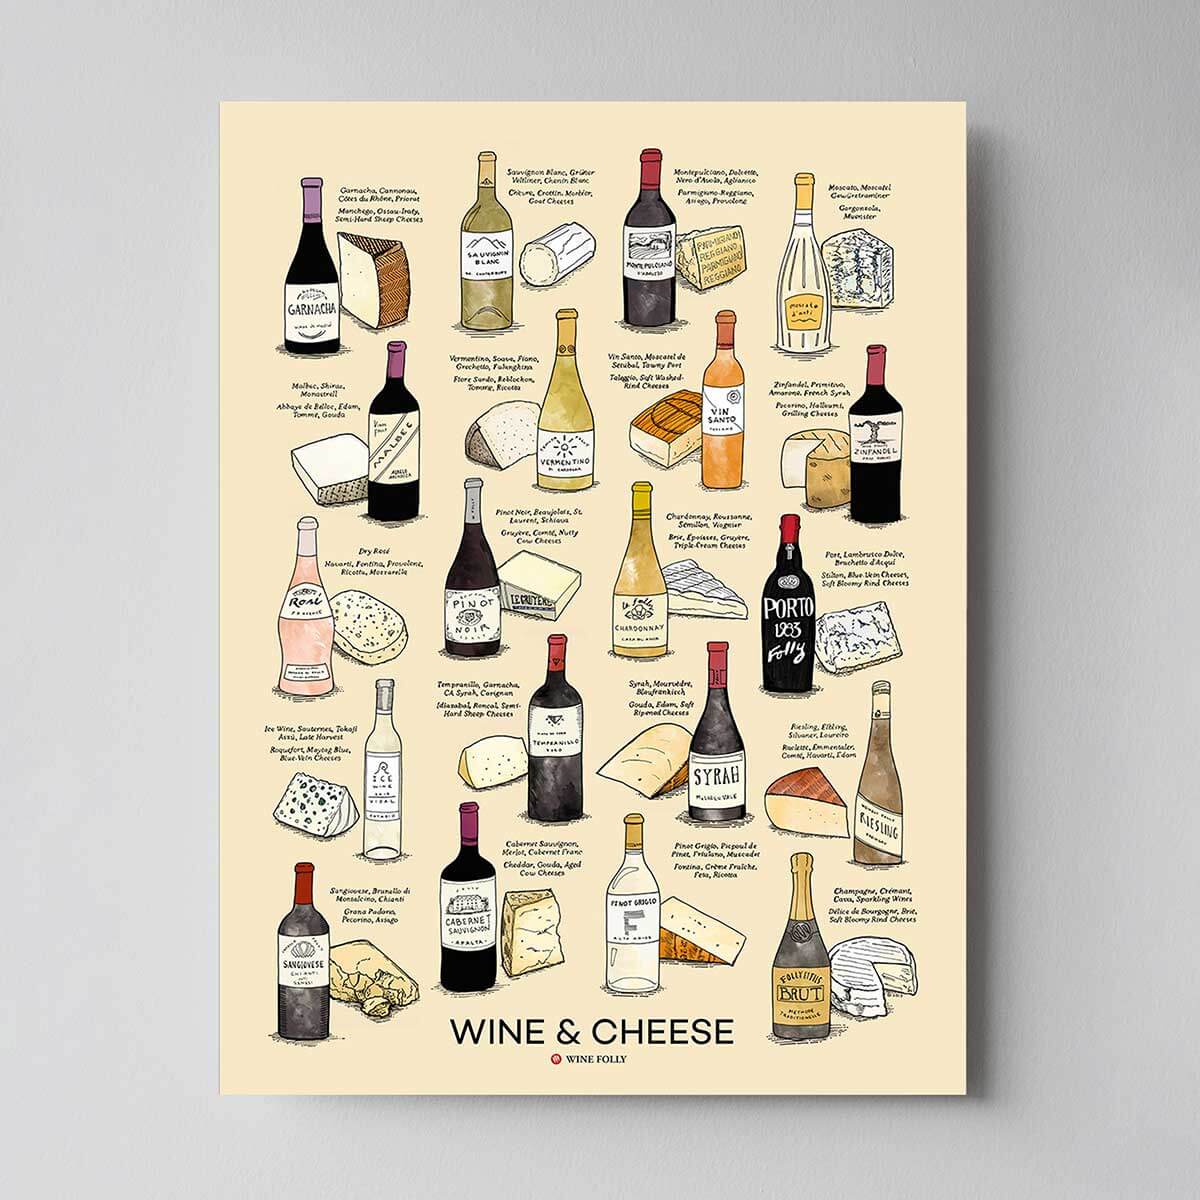 wine-and-cheese-poster-wine-folly